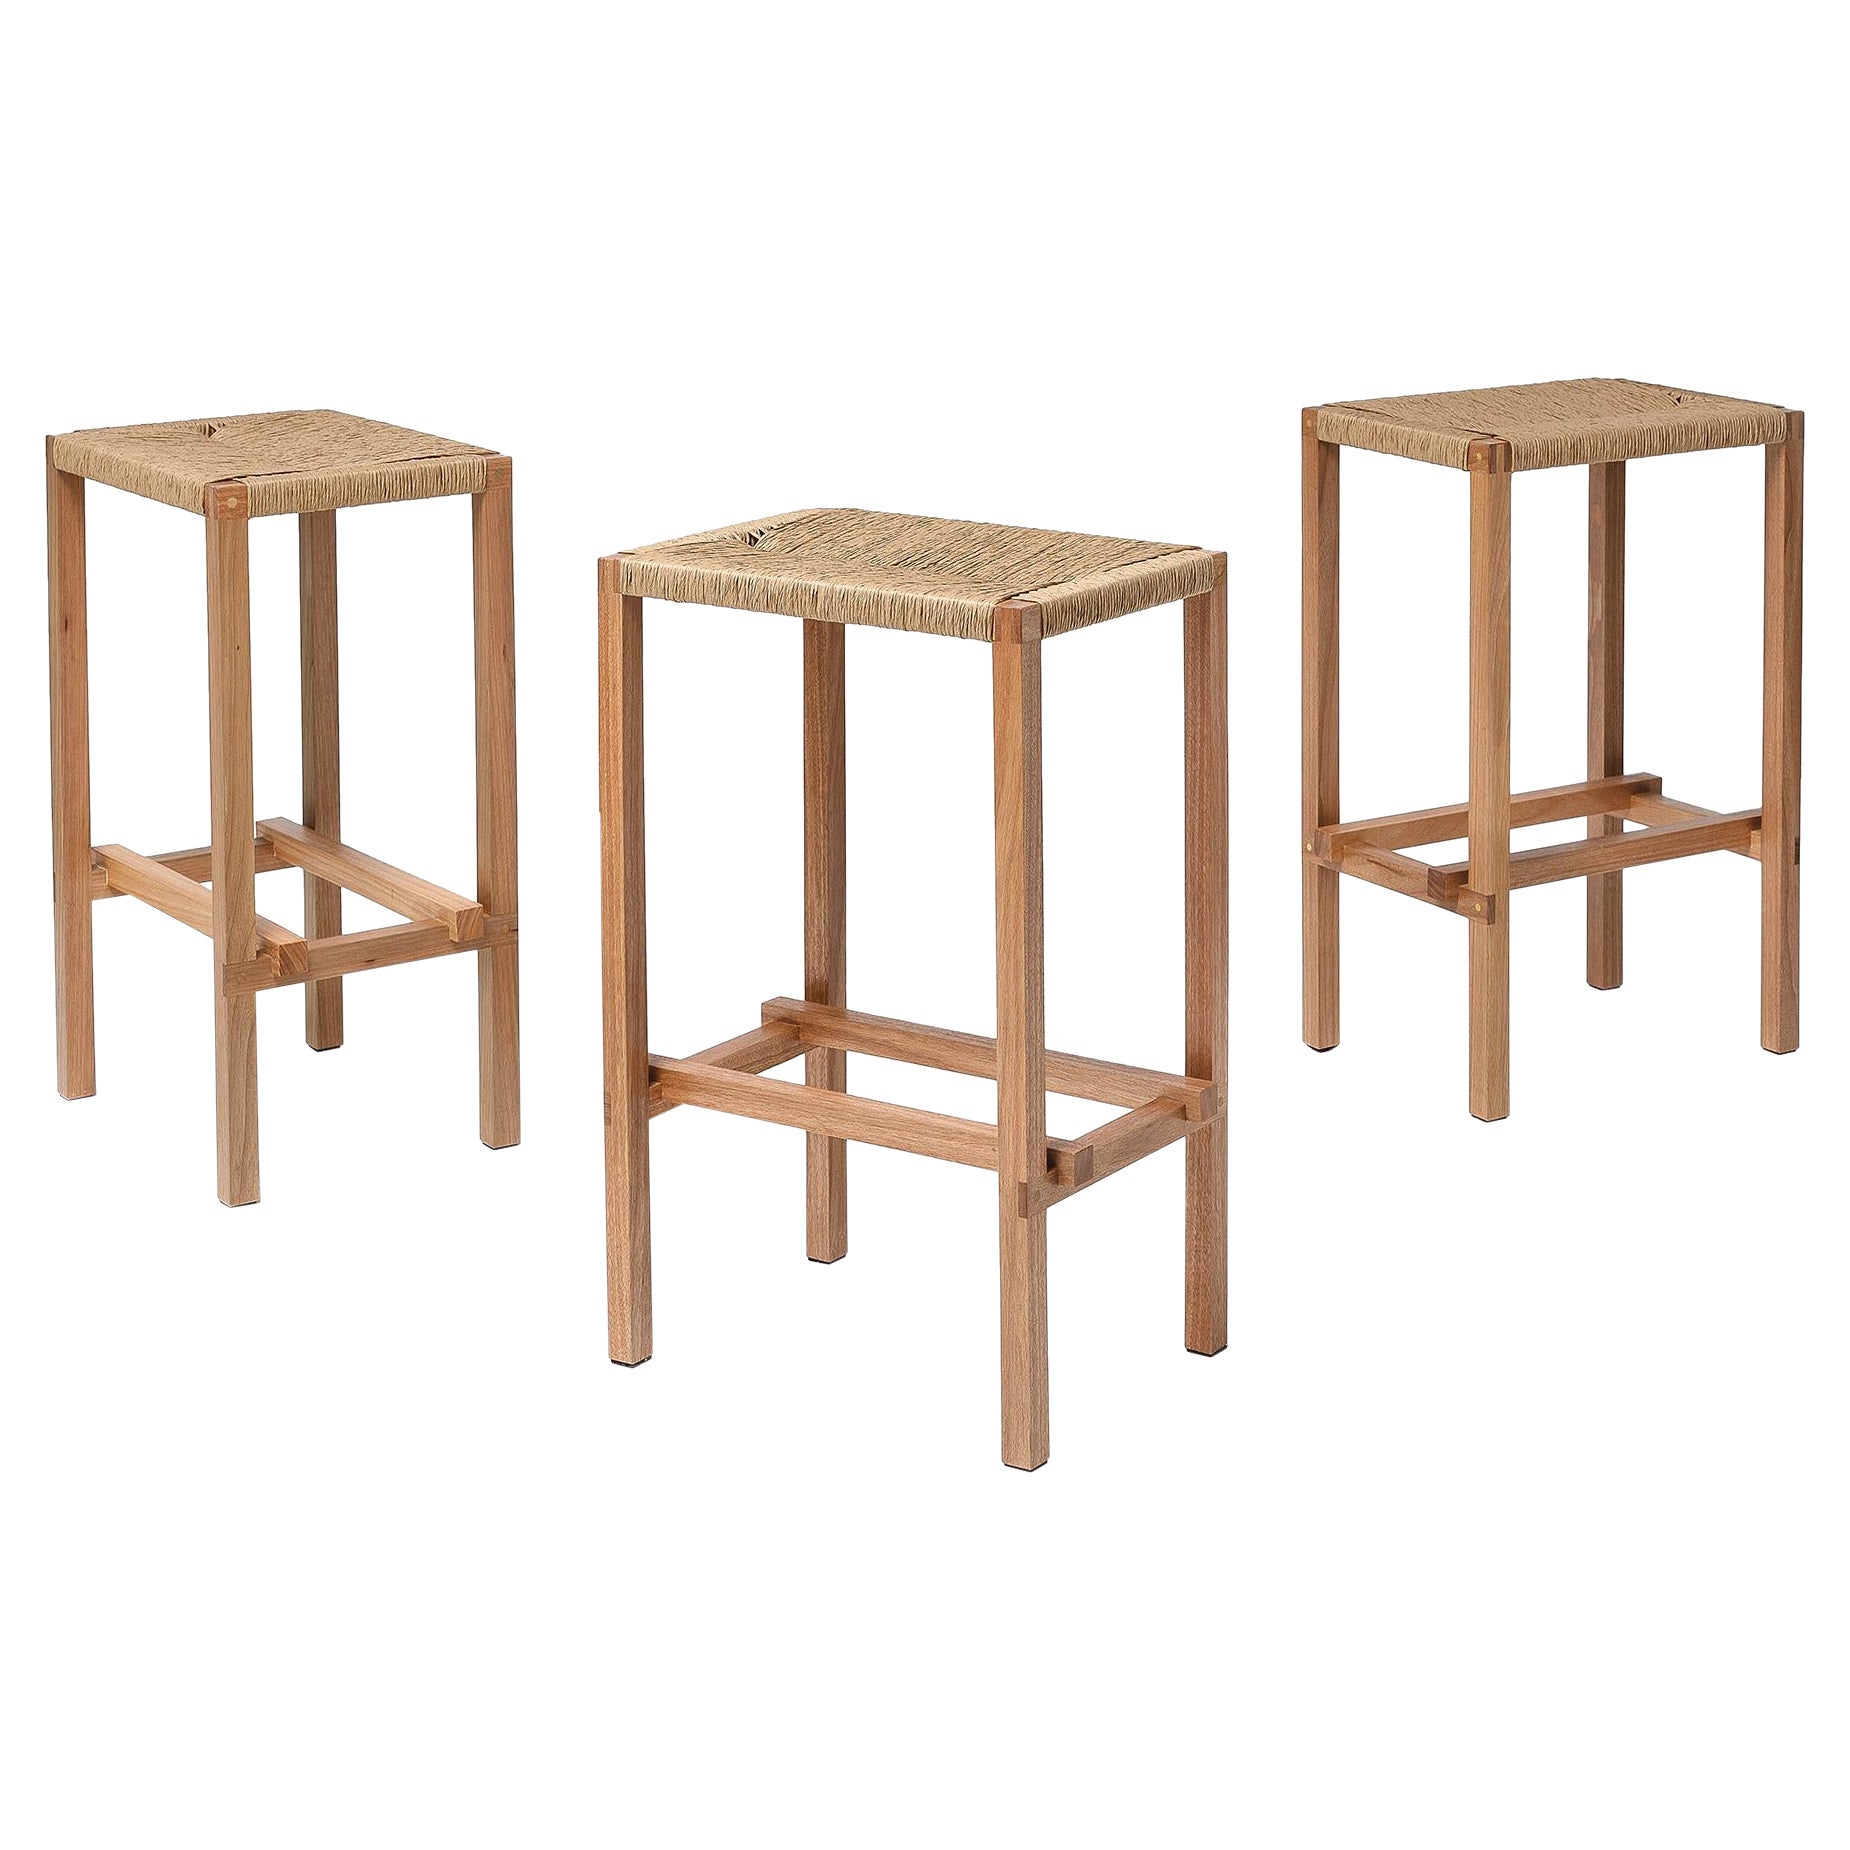 M2 Stool, Set of 3 Woven Seat Contemporary Handcrafted Solid Wood Furniture